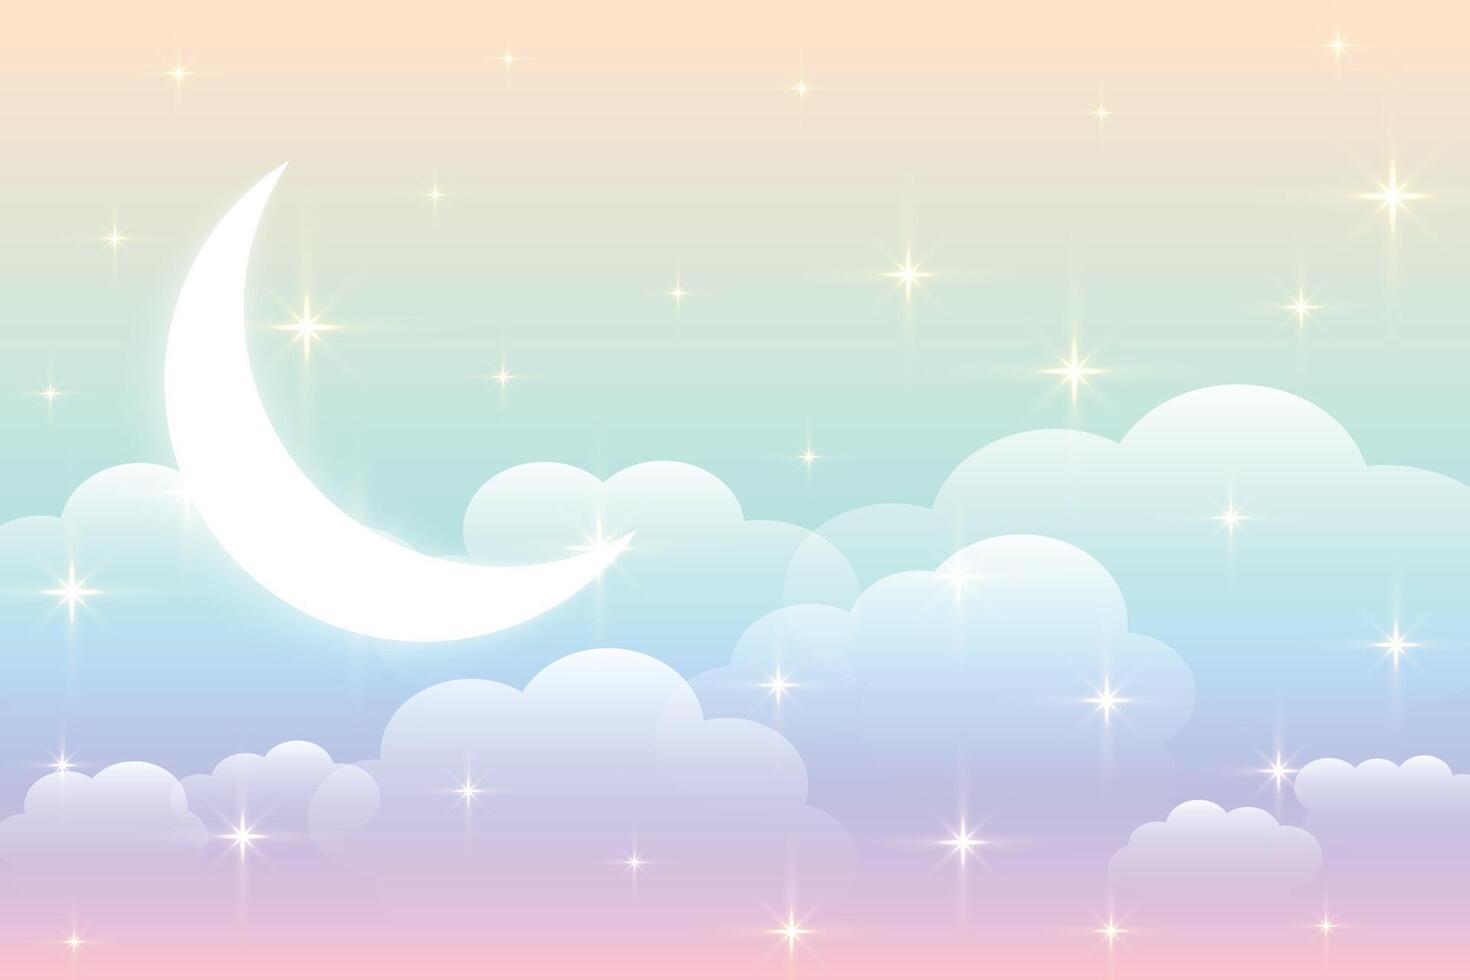 sky rainbow background with glowing moon design vector